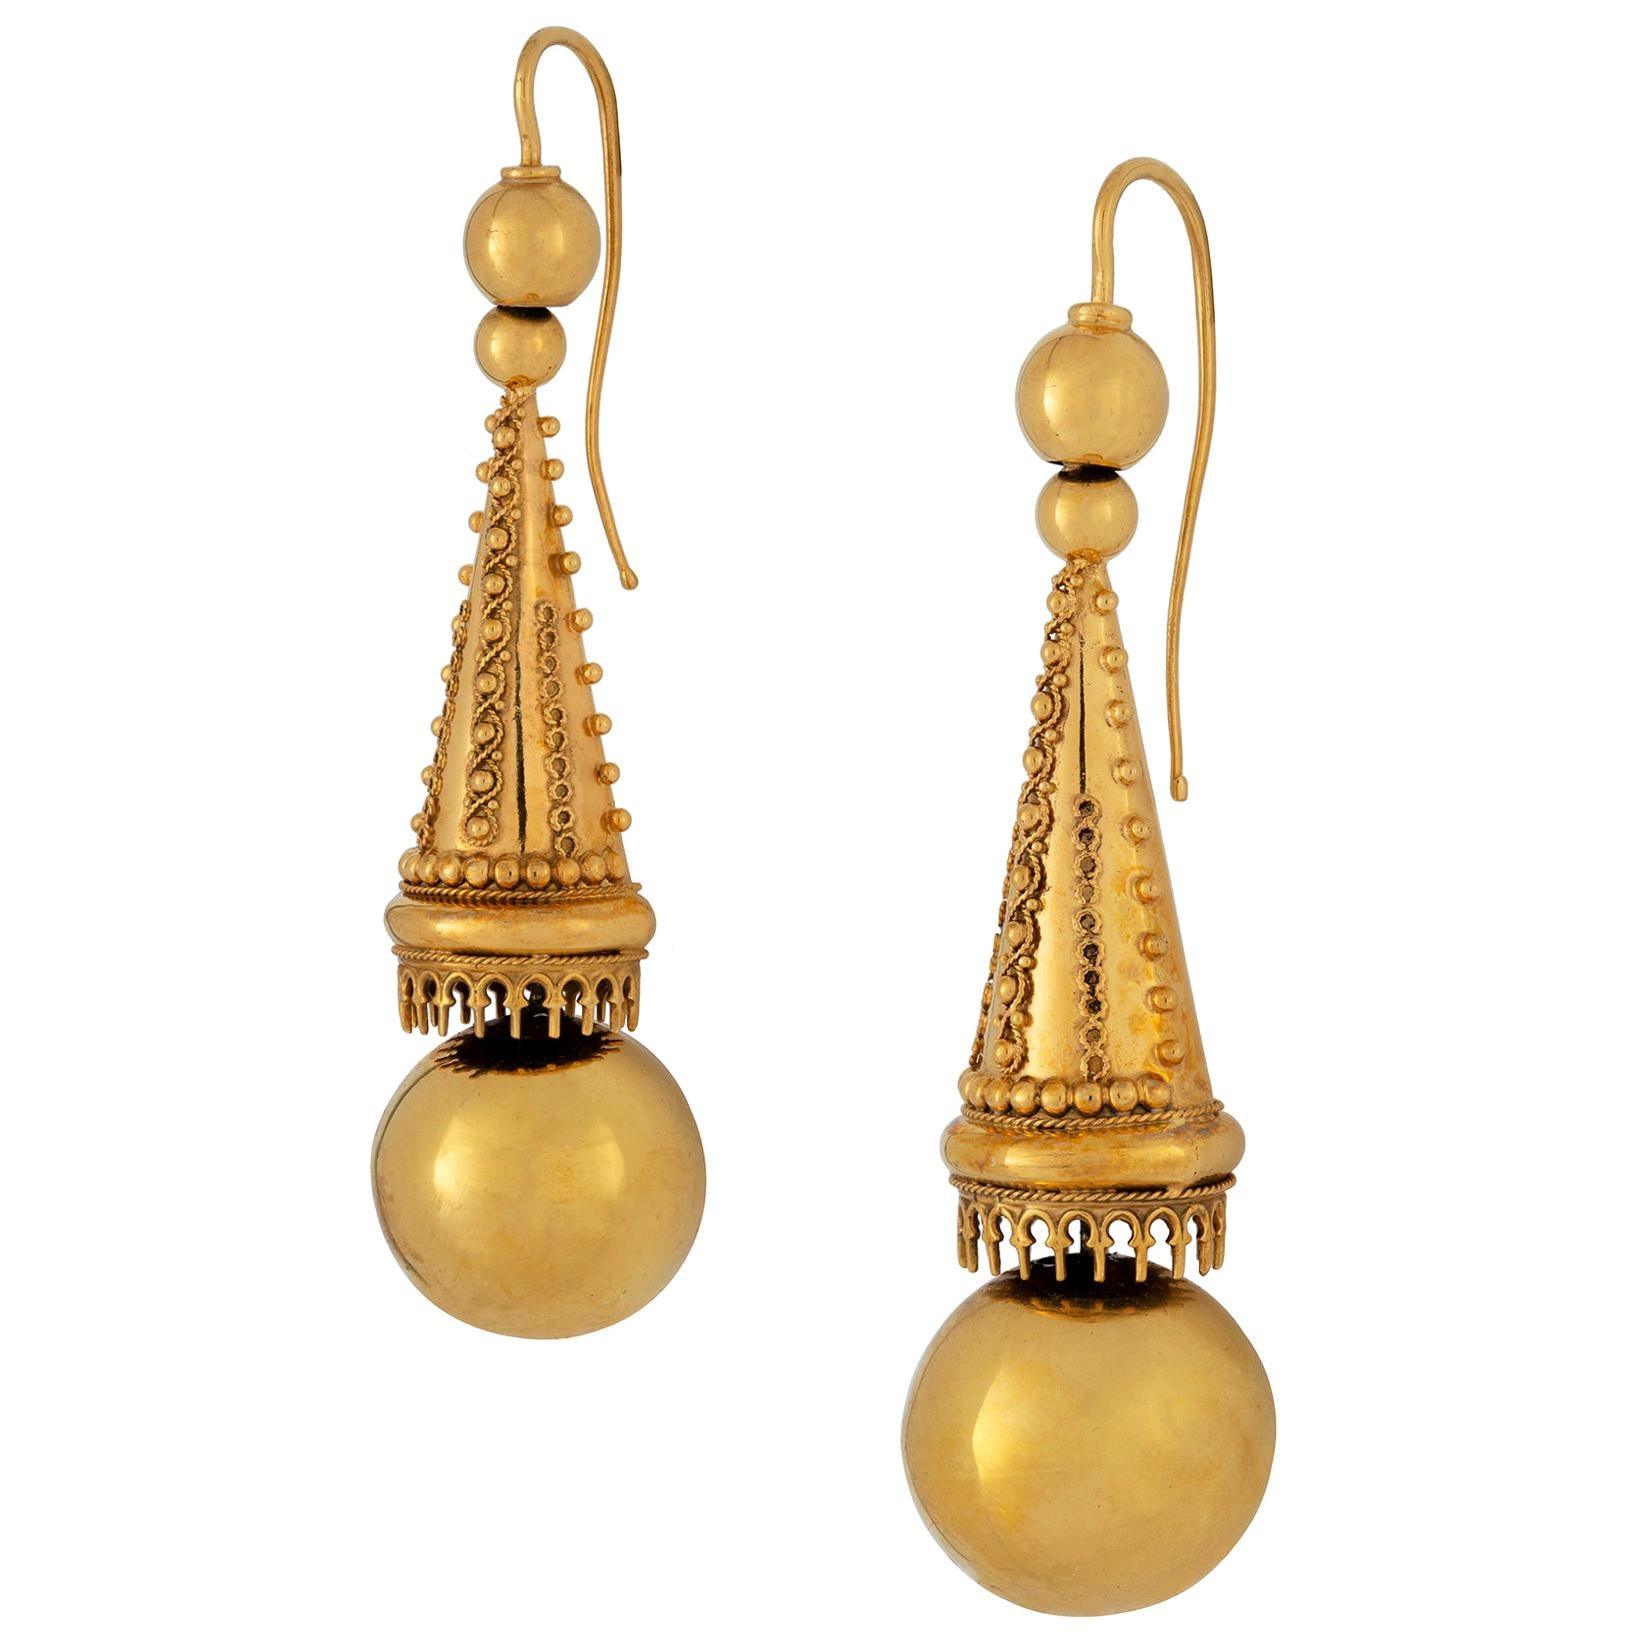 Pair of Victorian Archaeological Revival Drop Earrings